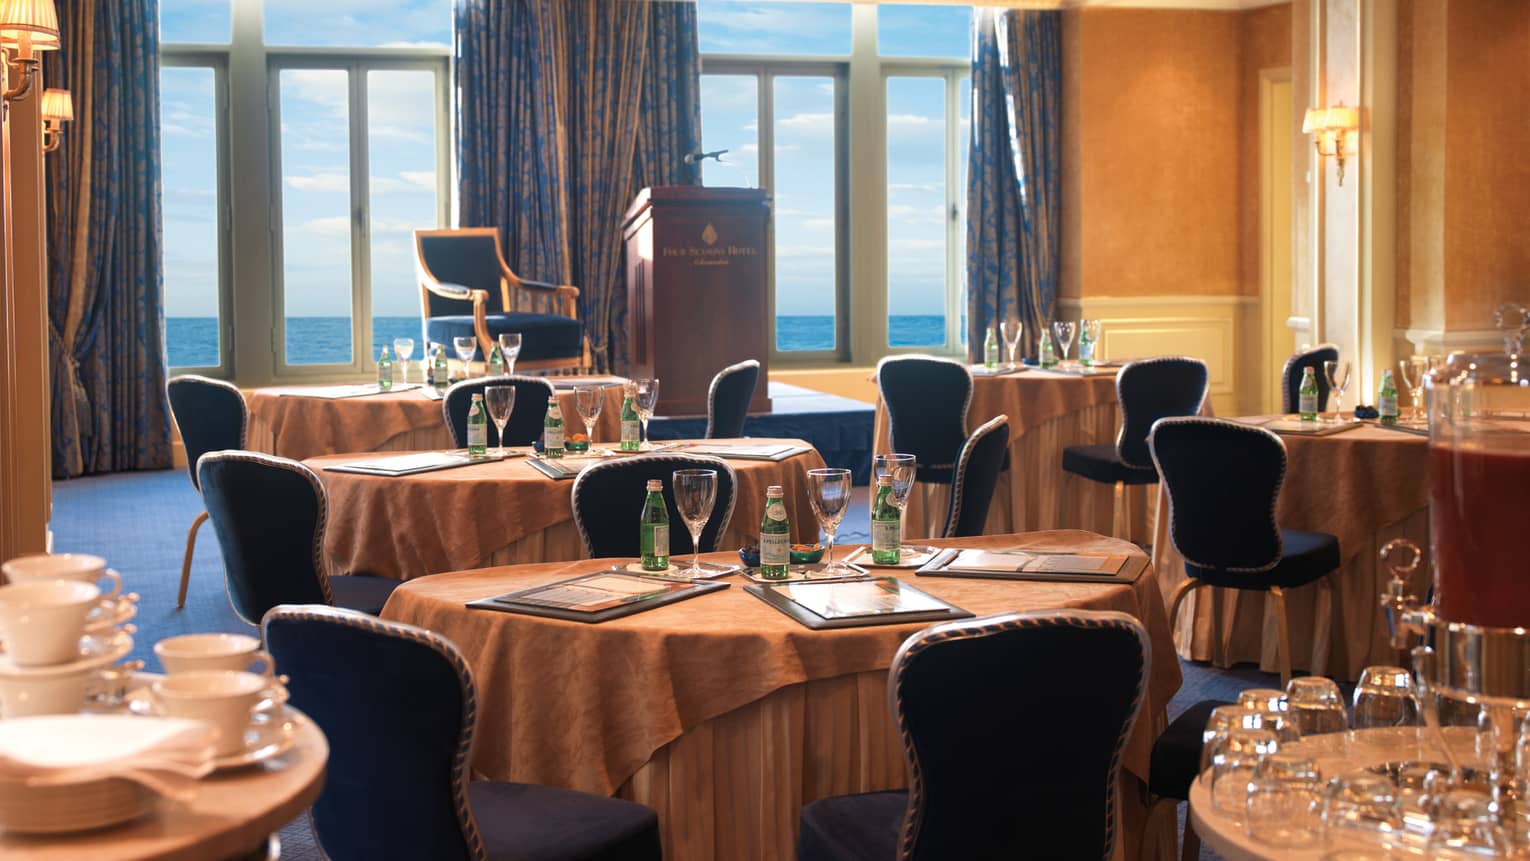 Sun-lit meeting room with round tables, royal blue chairs, podium facing floor-to-ceiling window and ocean views 